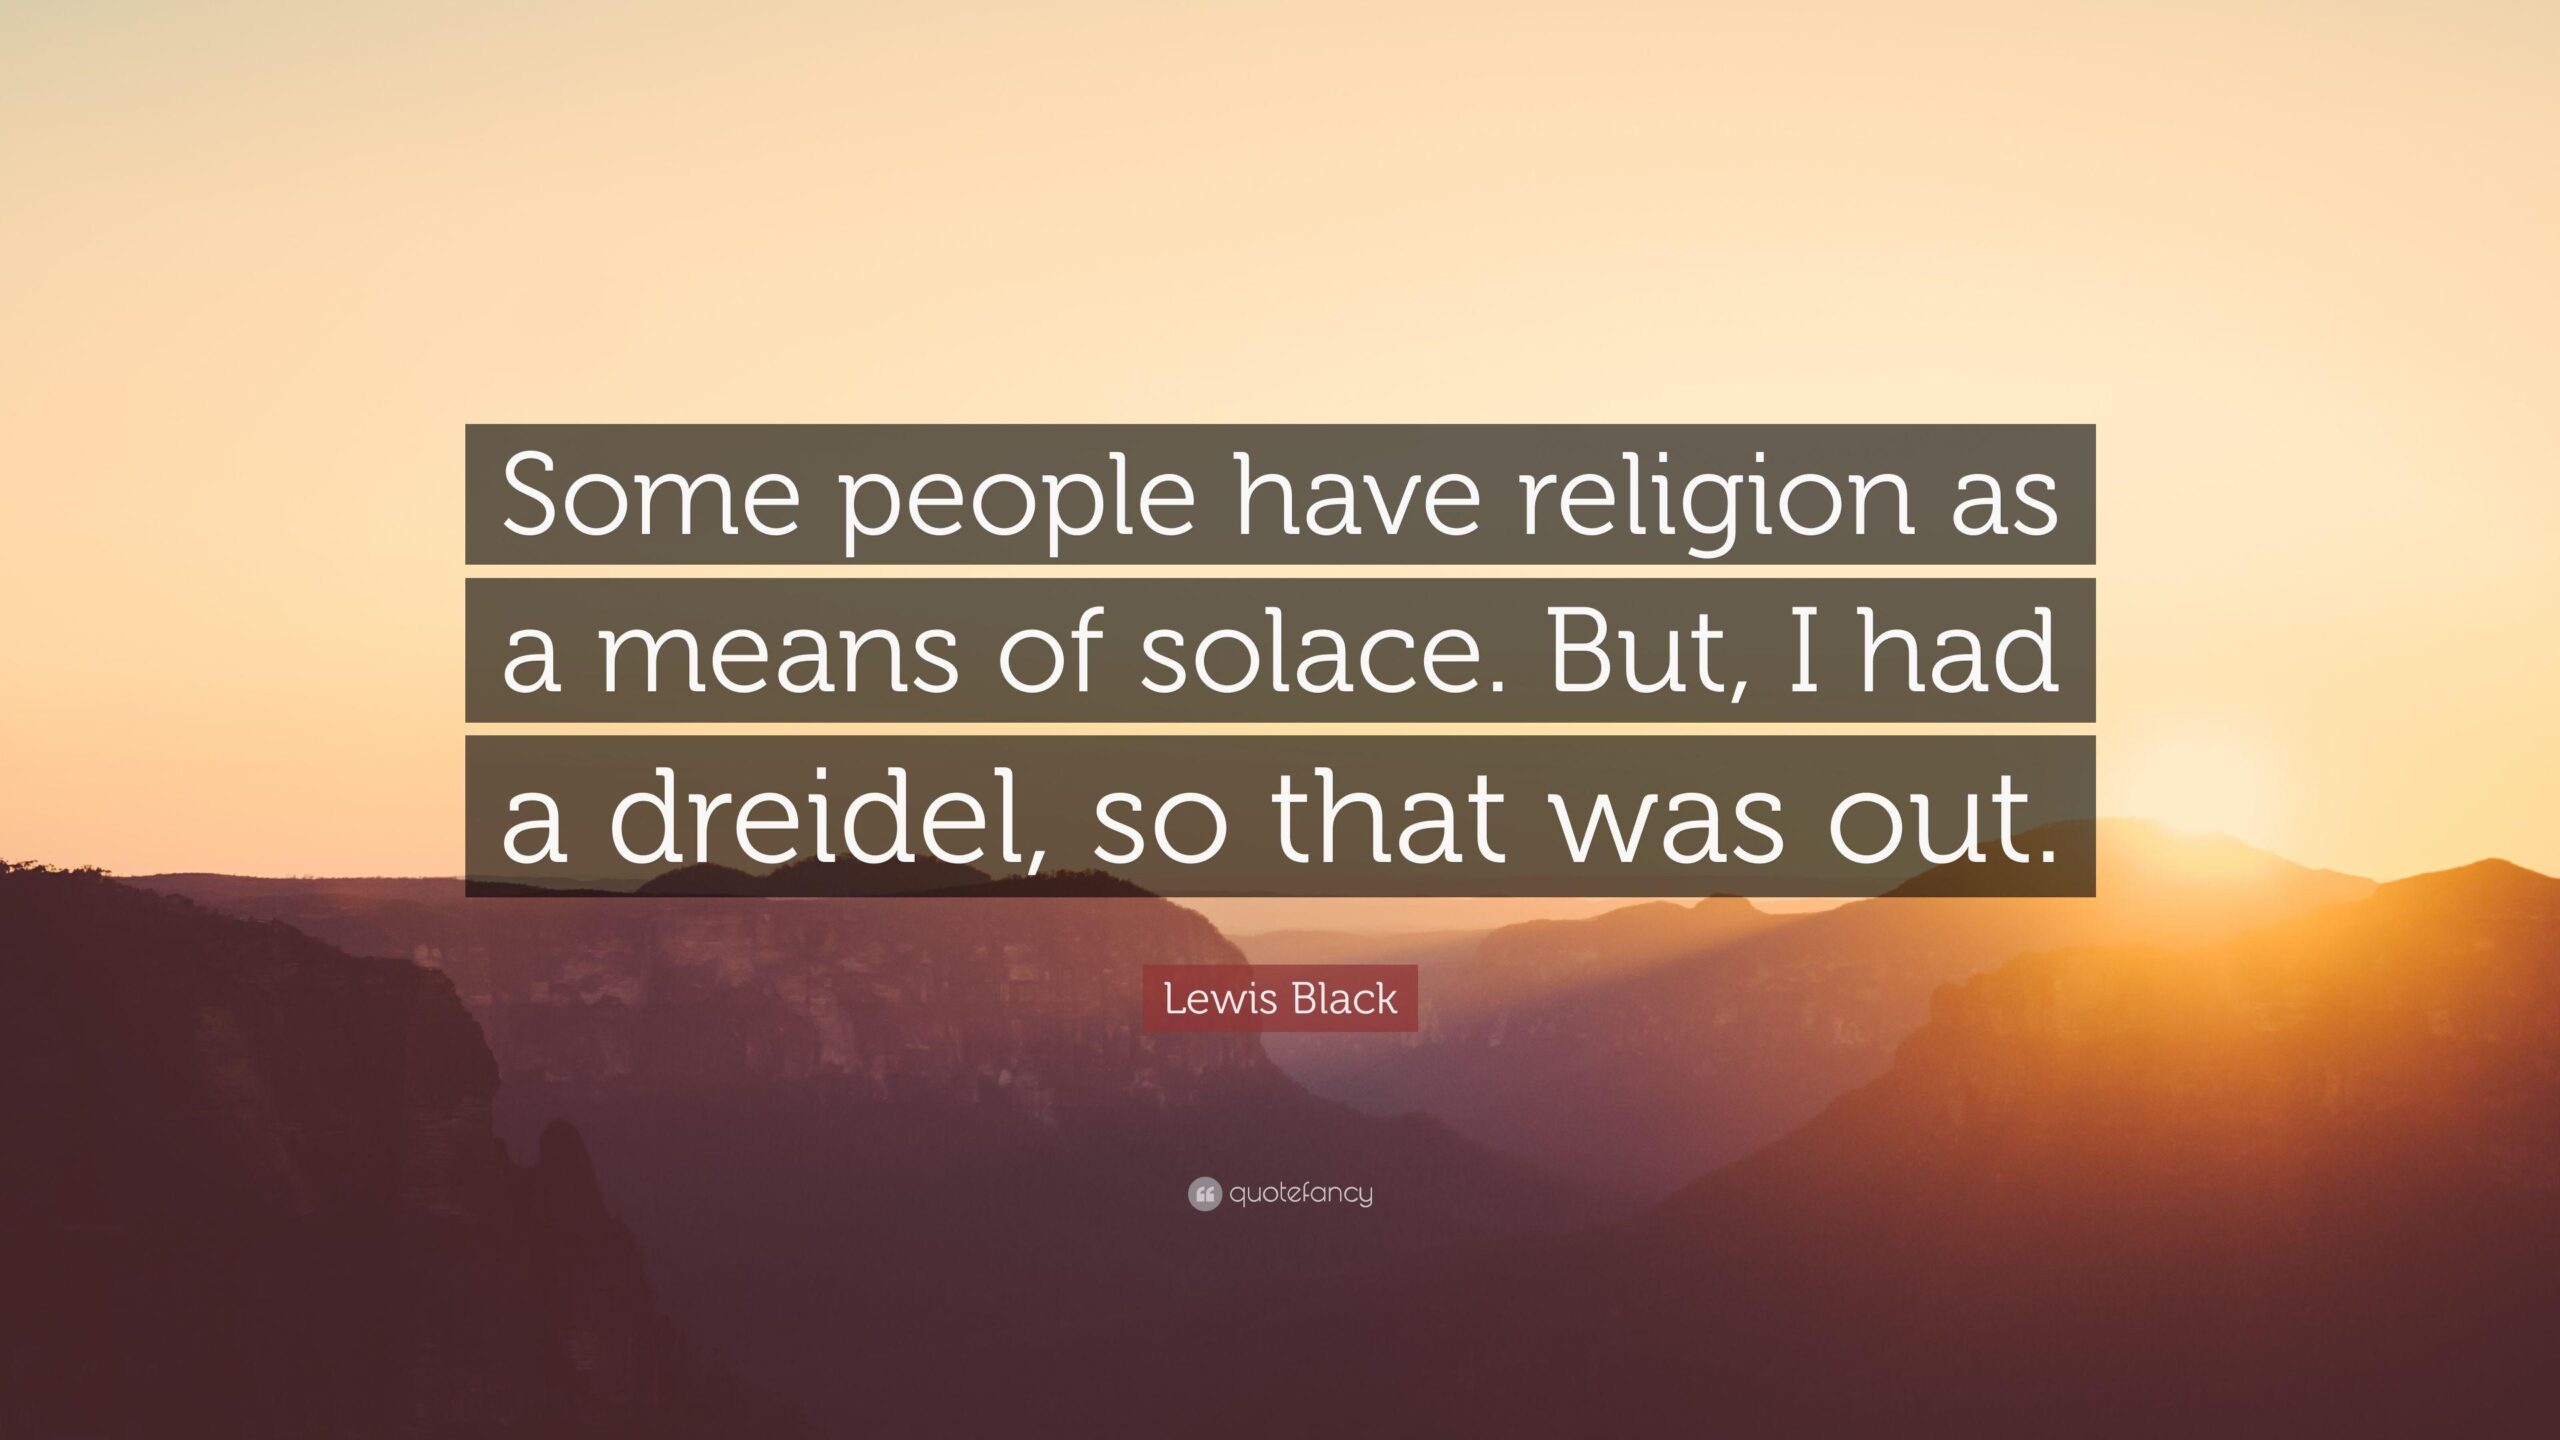 Lewis Black Quote “Some people have religion as a means of solace